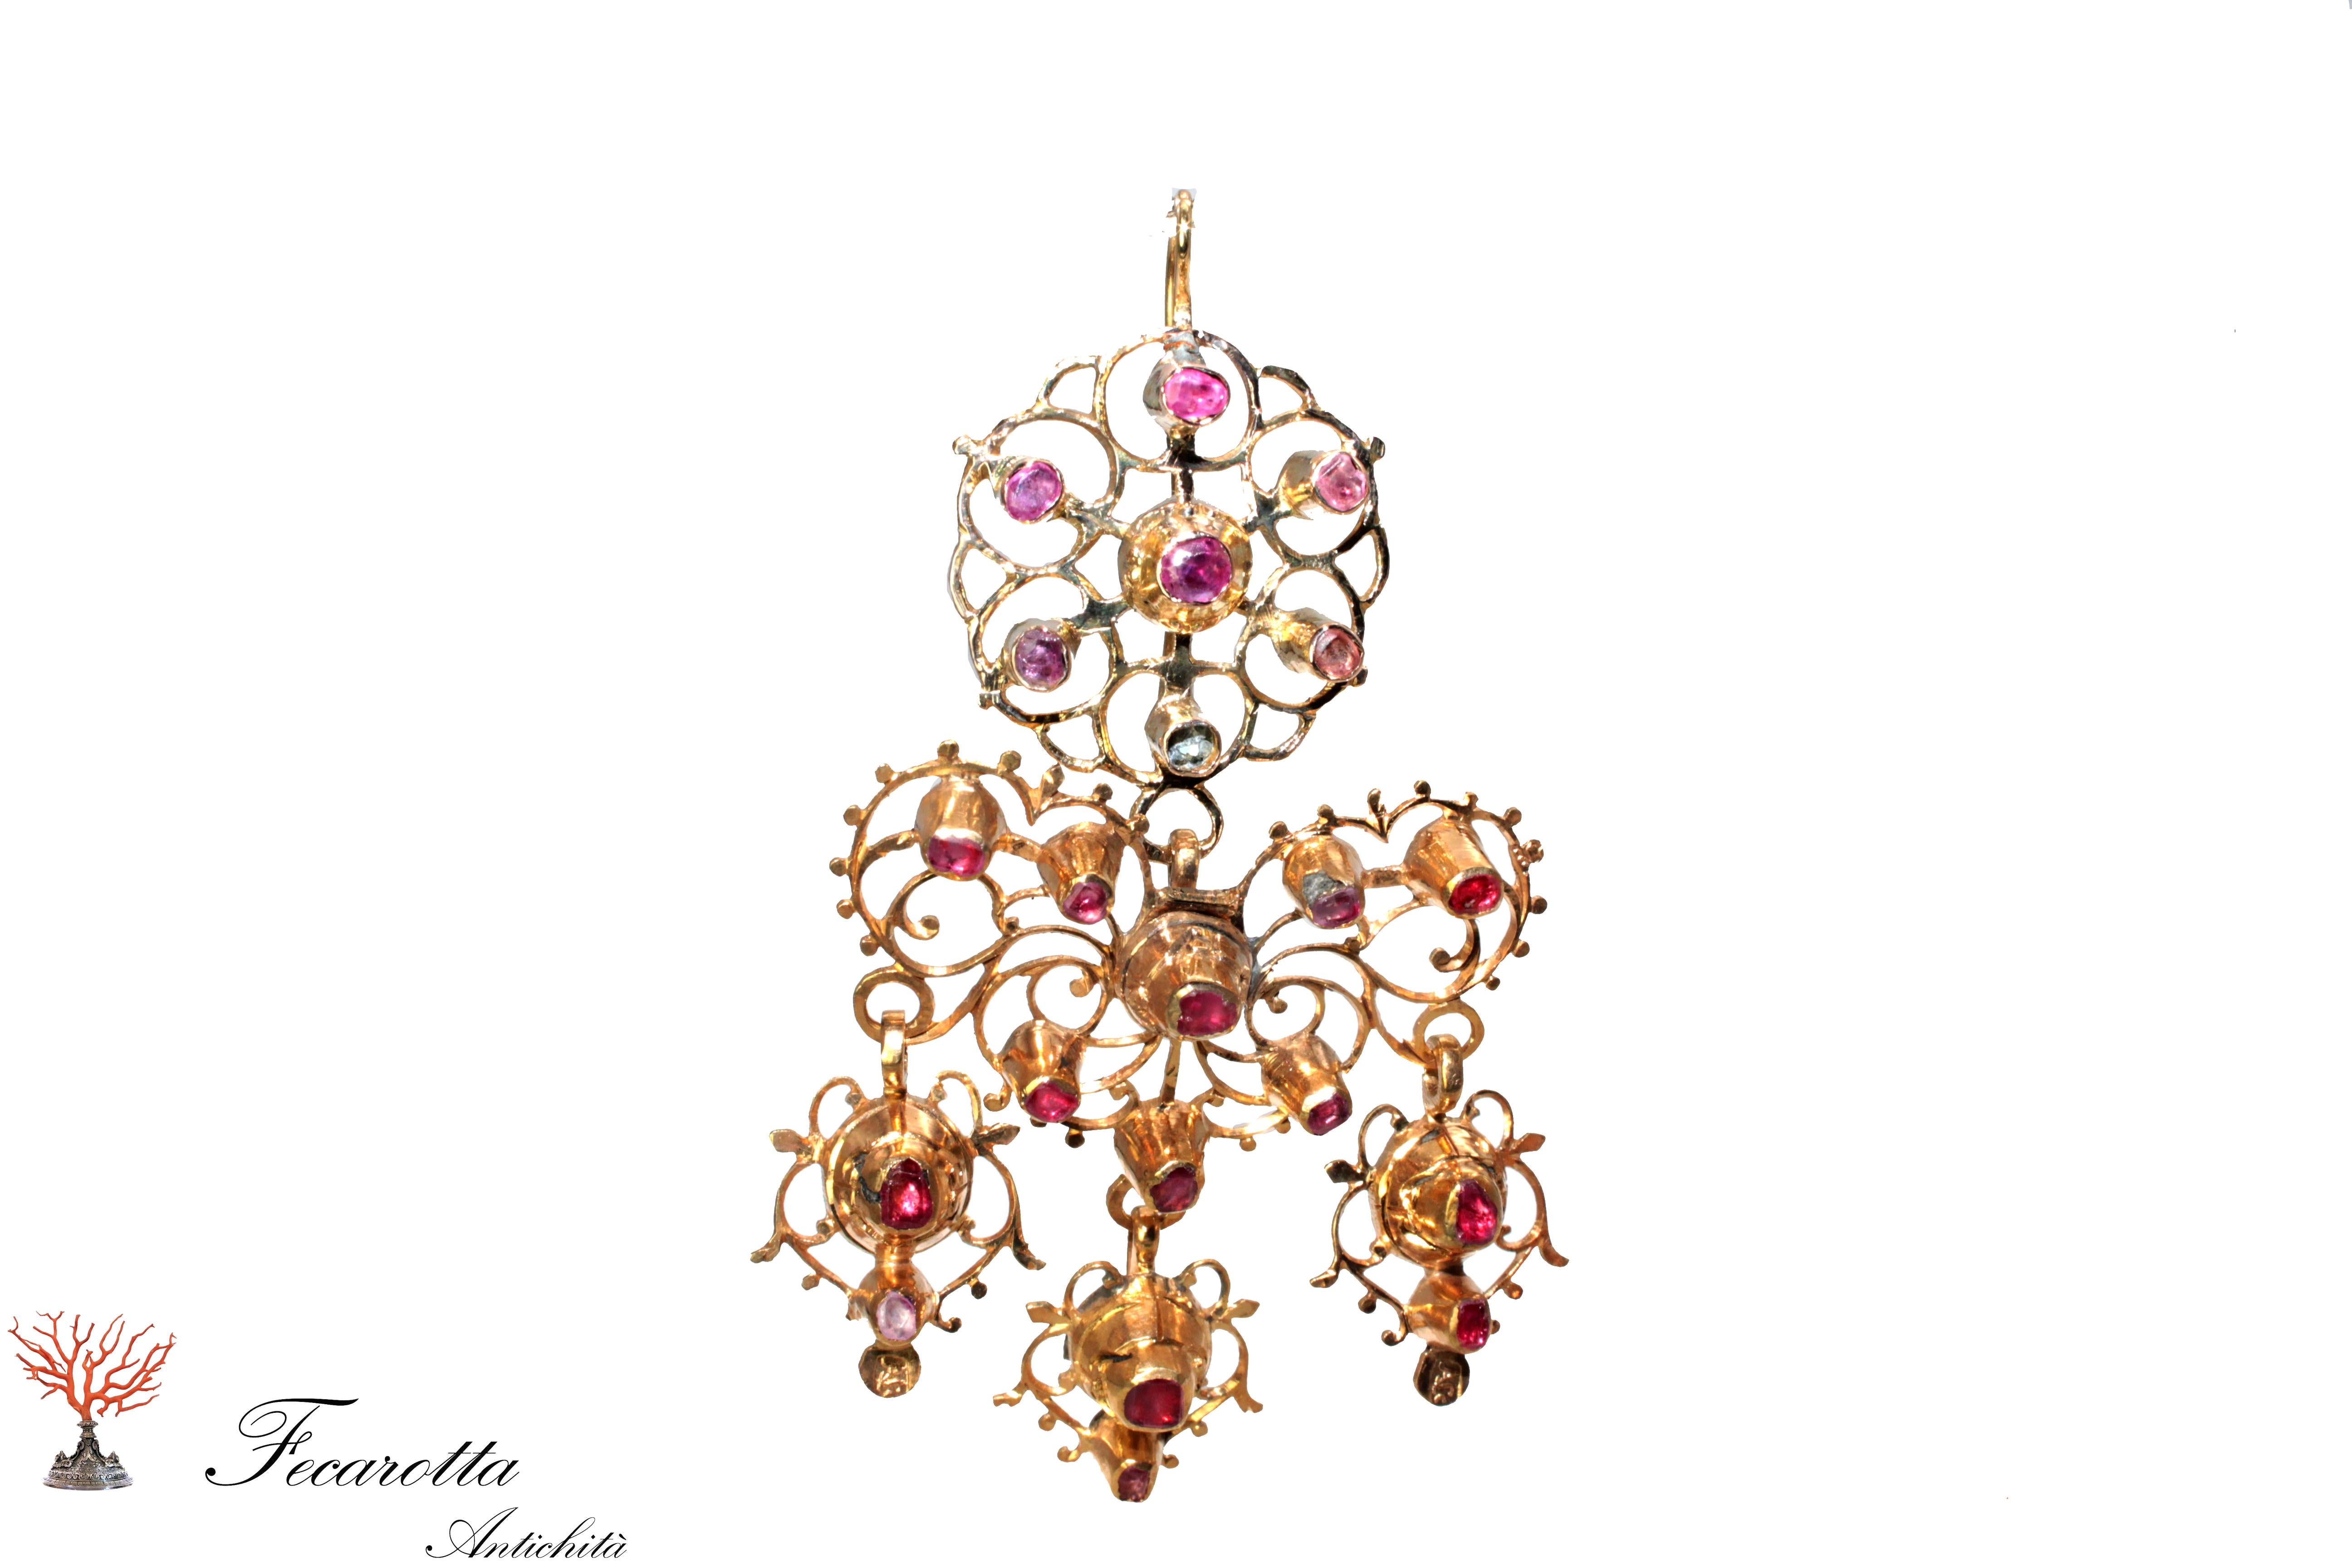 George III Chandelier Earrings Ruby and Gold 14 Karat, 18th Century For Sale